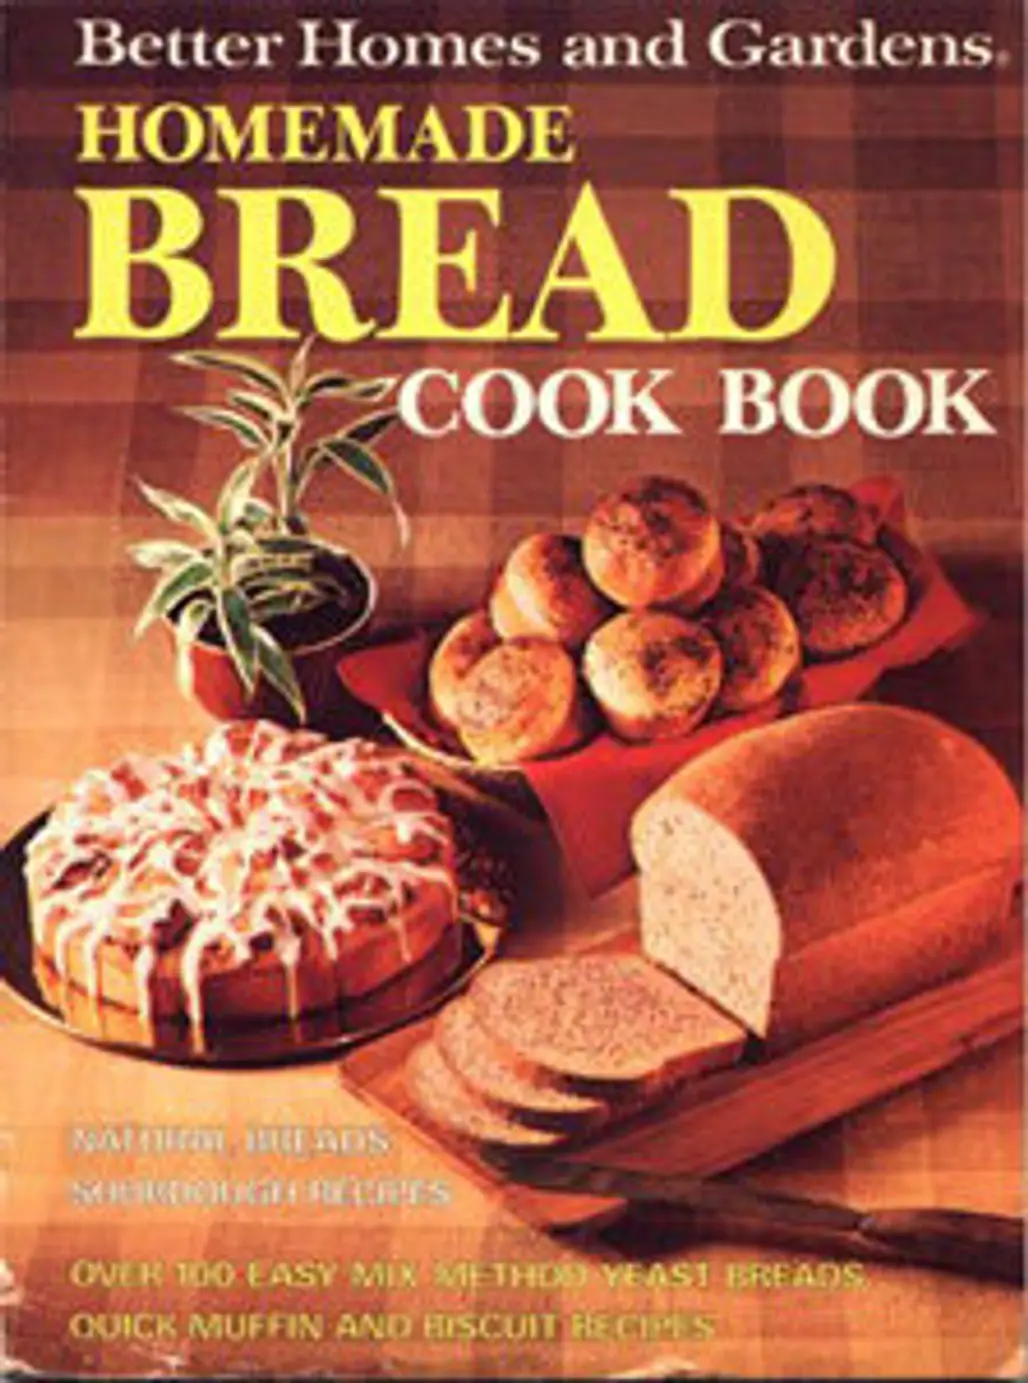 Better Homes and Gardens Homemade Bread Cook Book